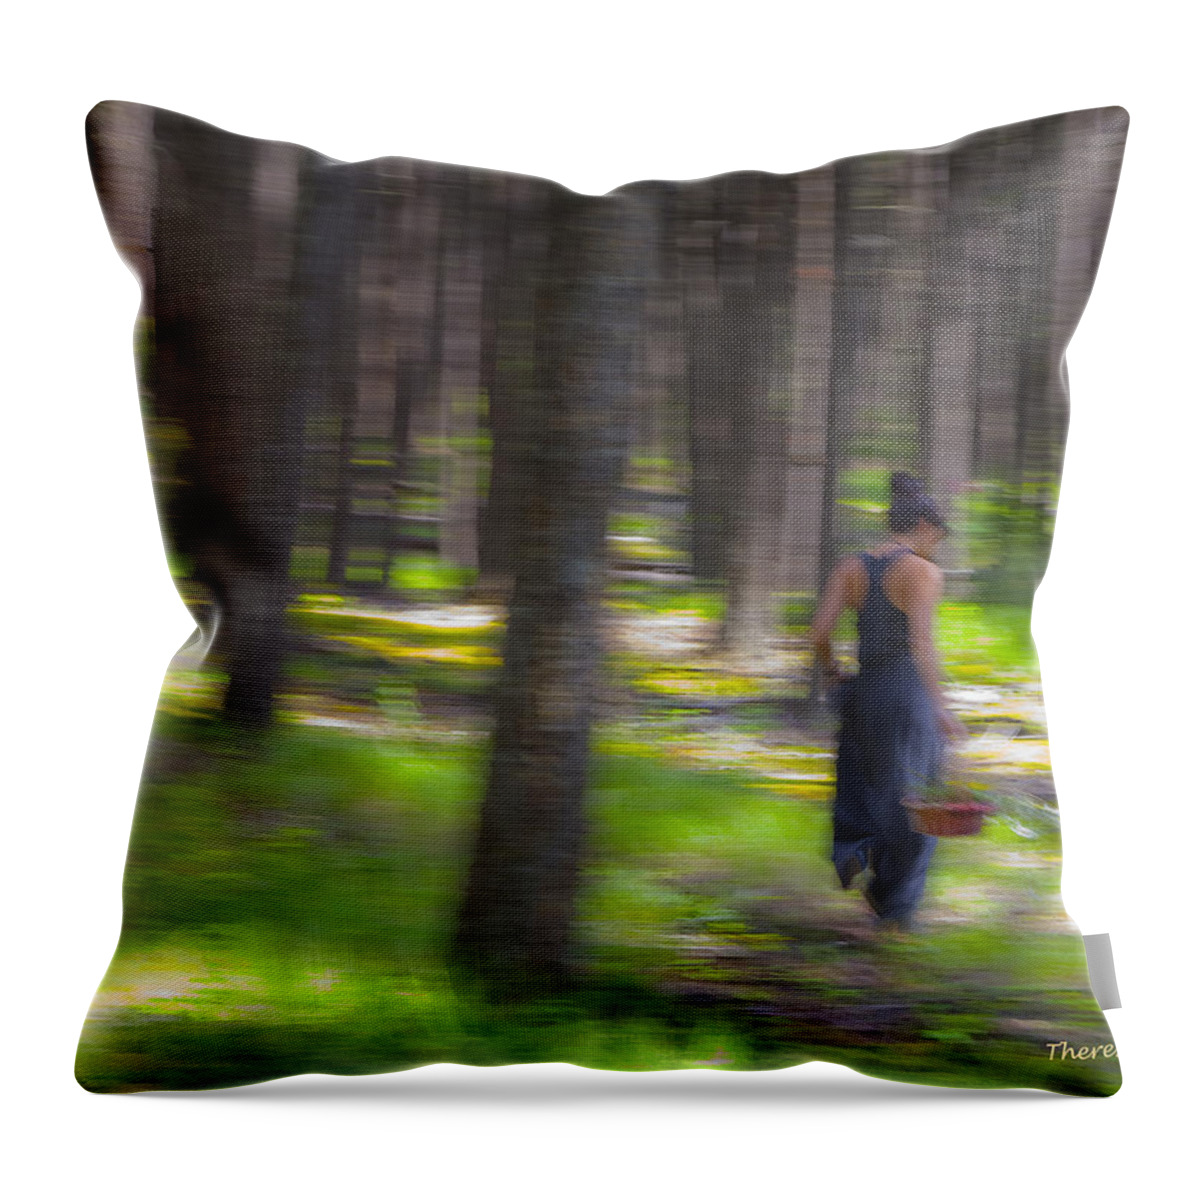 Impressionist Throw Pillow featuring the photograph Through The Woods 2 by Theresa Tahara